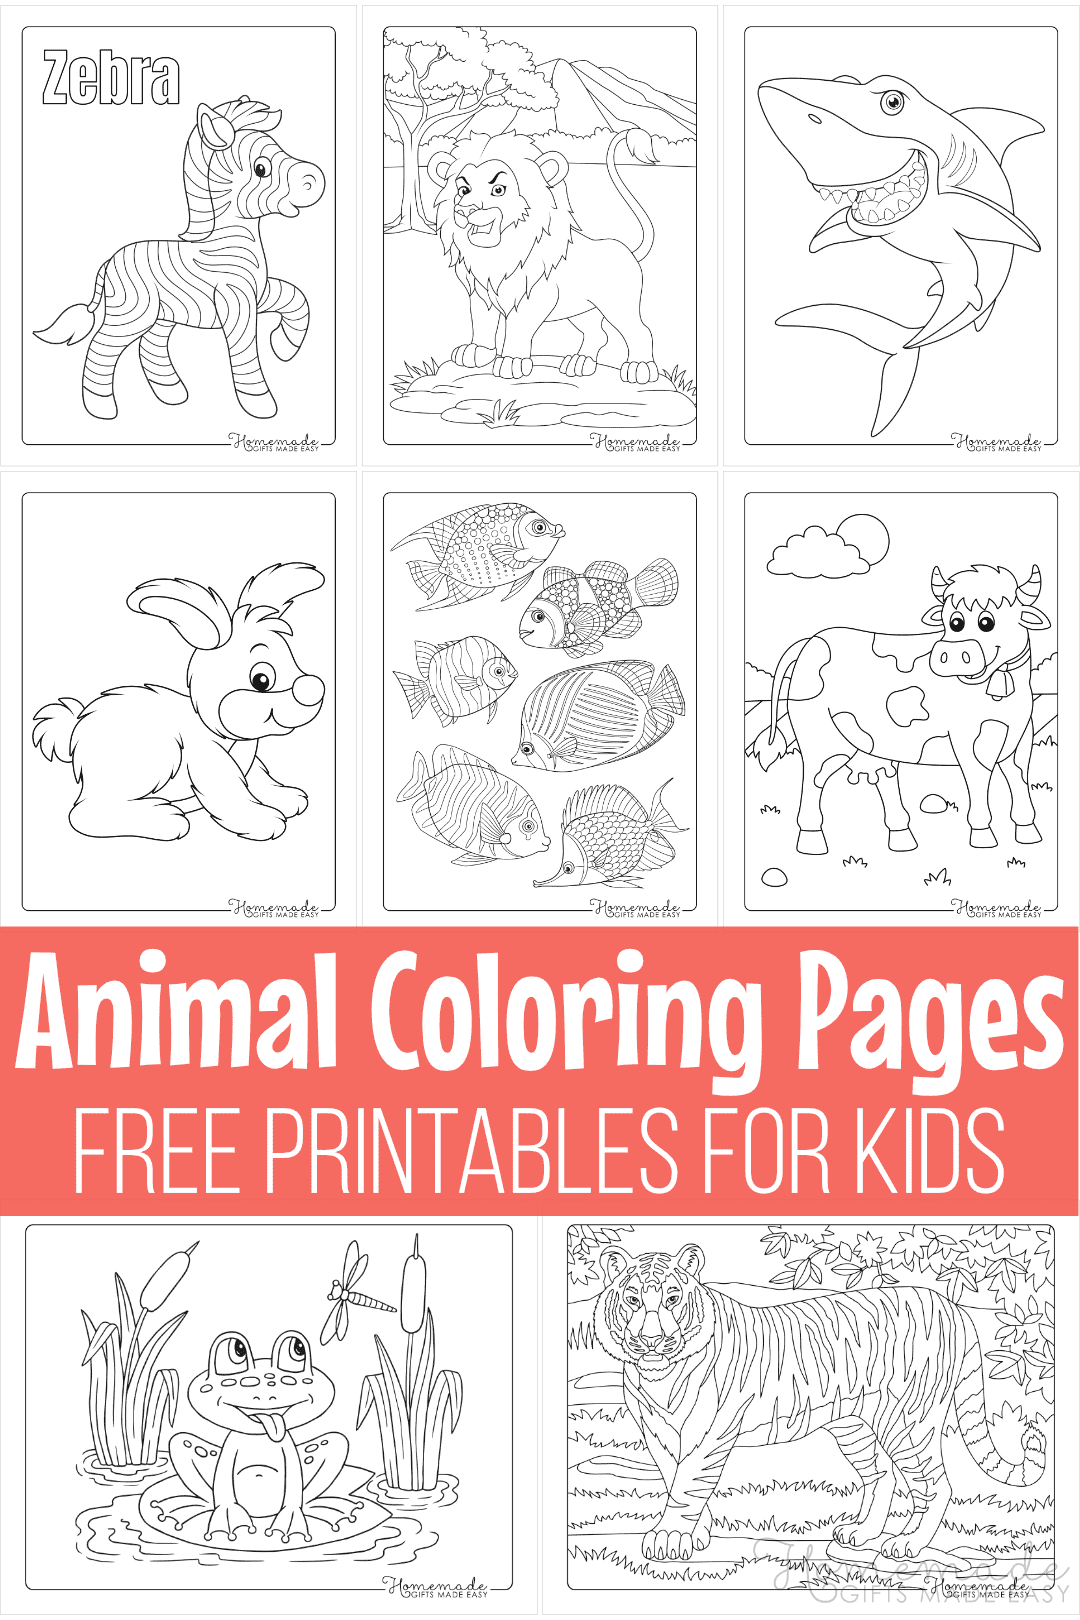 Free Animal Coloring Pages For Kids - Free Printable Animal Coloring Pages